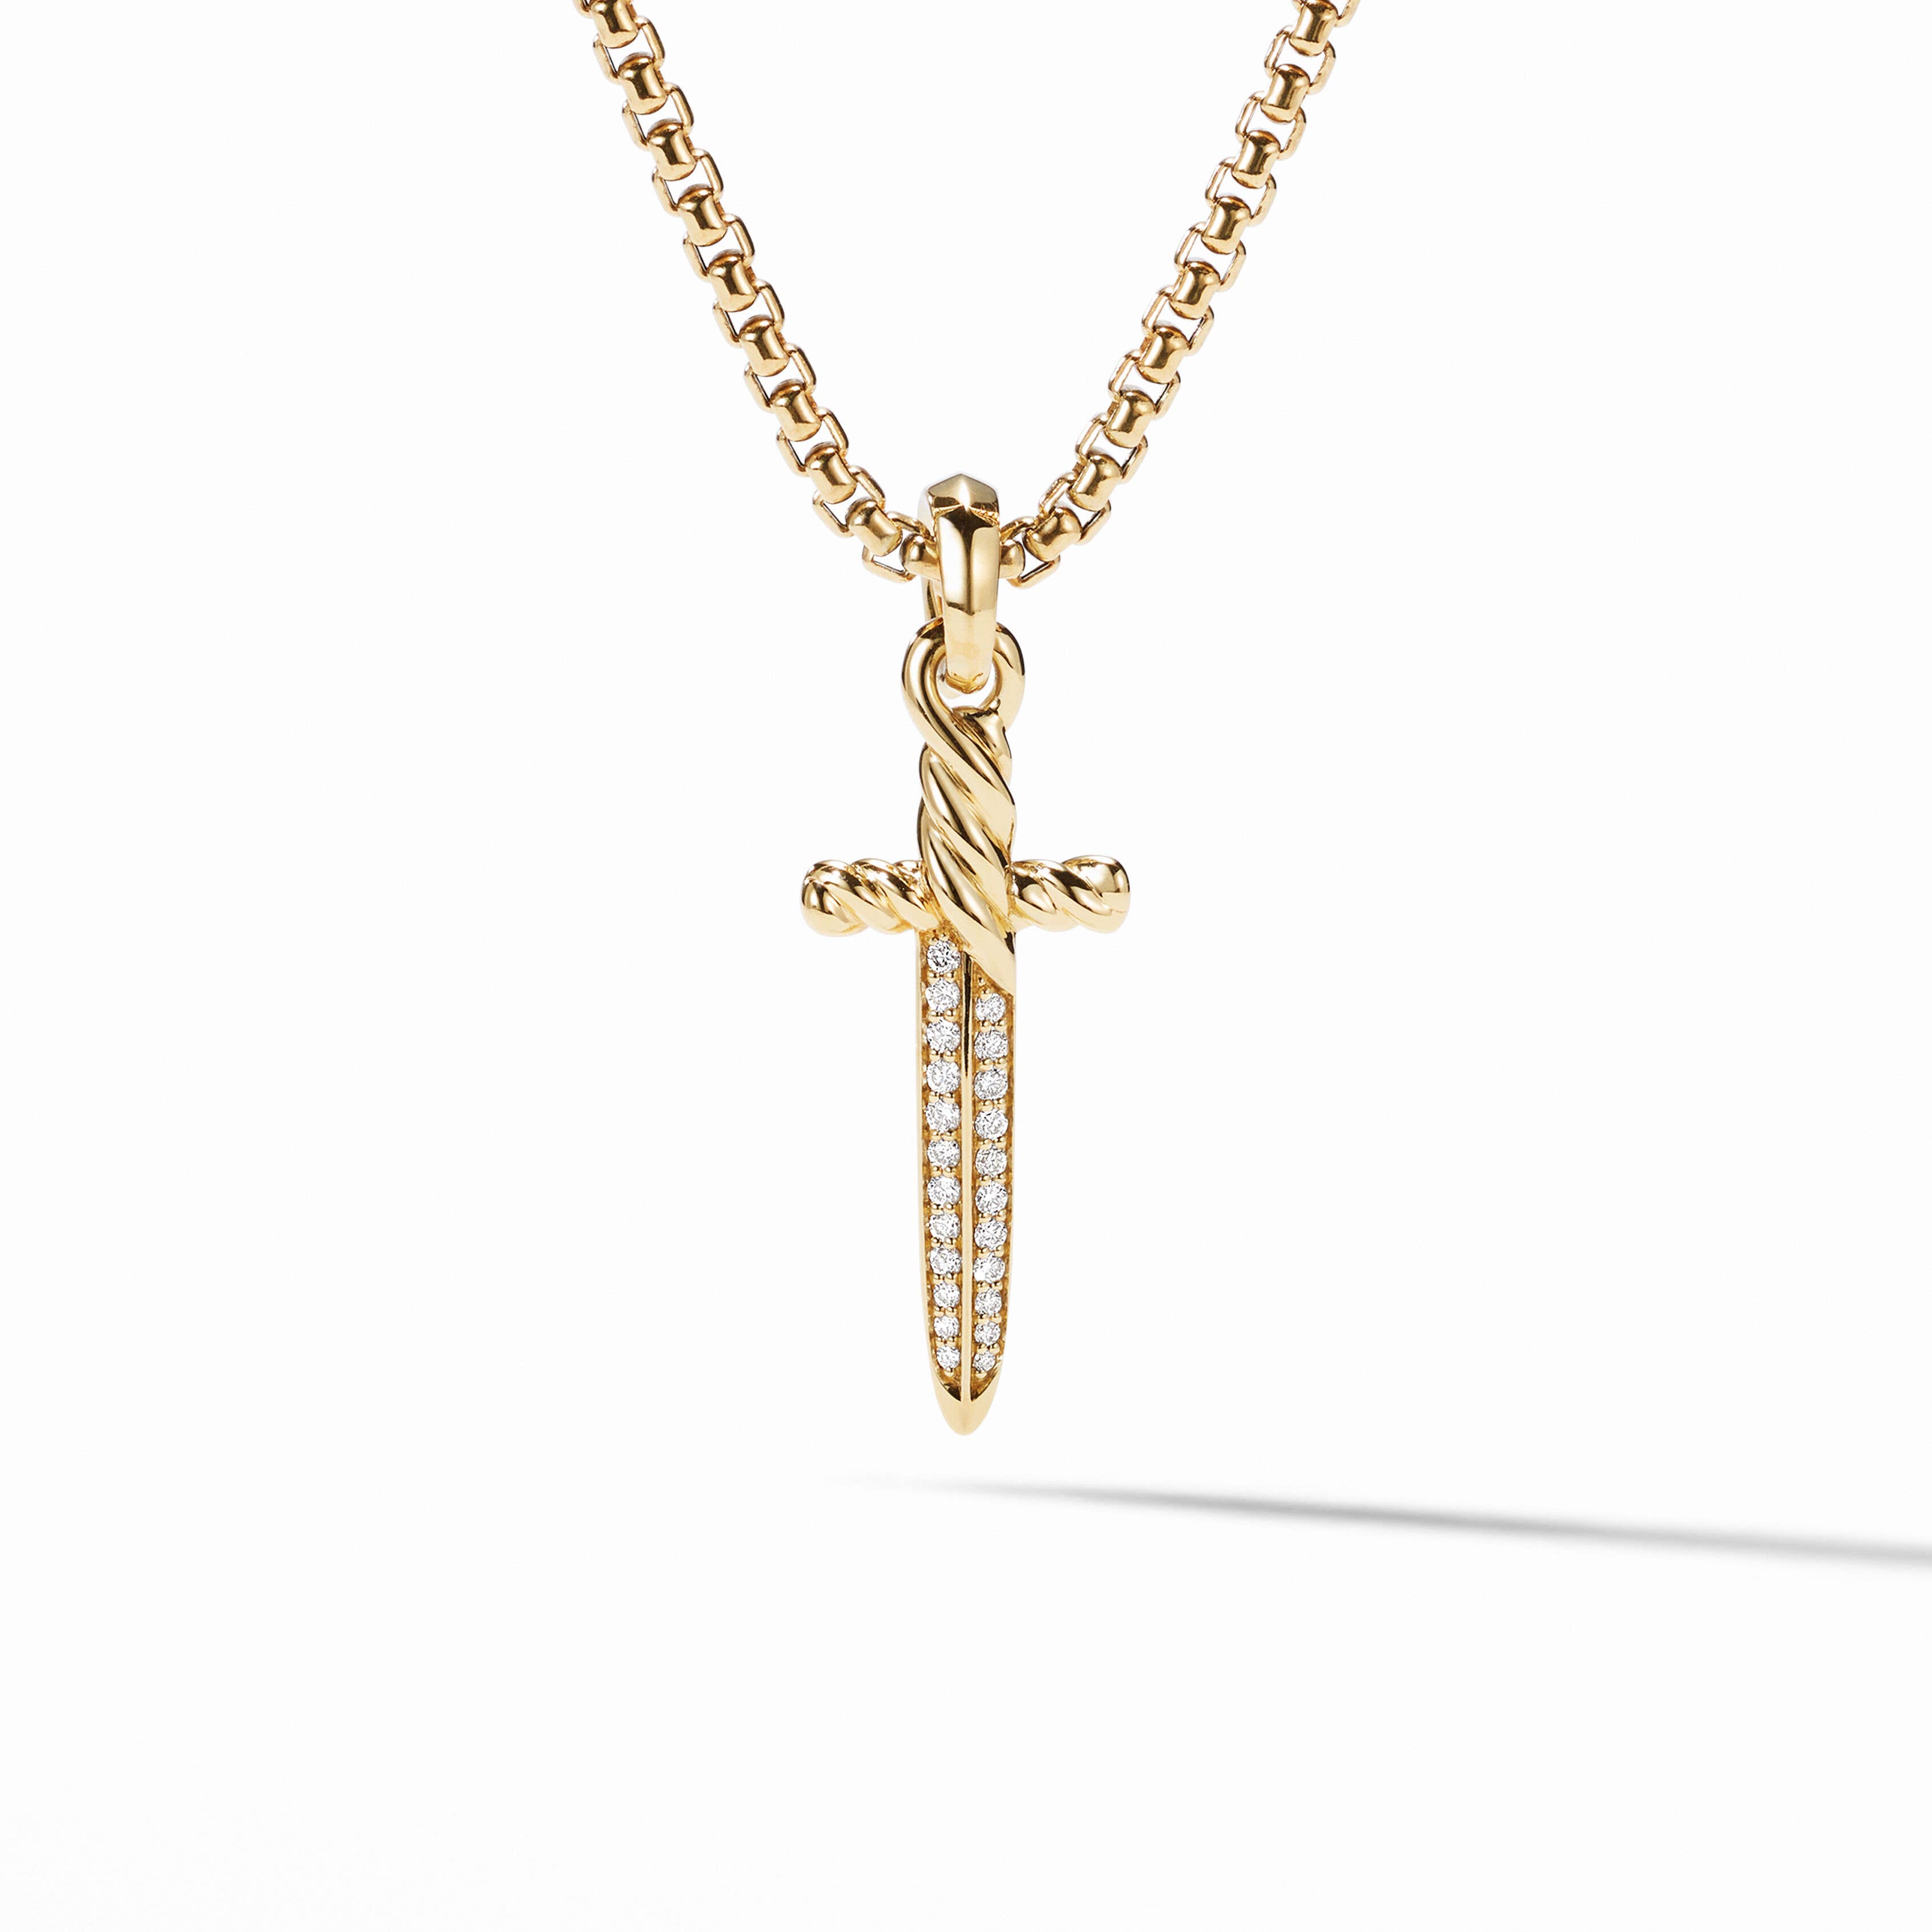 Petrvs® Dagger Amulet in 18K Yellow Gold with Pavé Diamonds